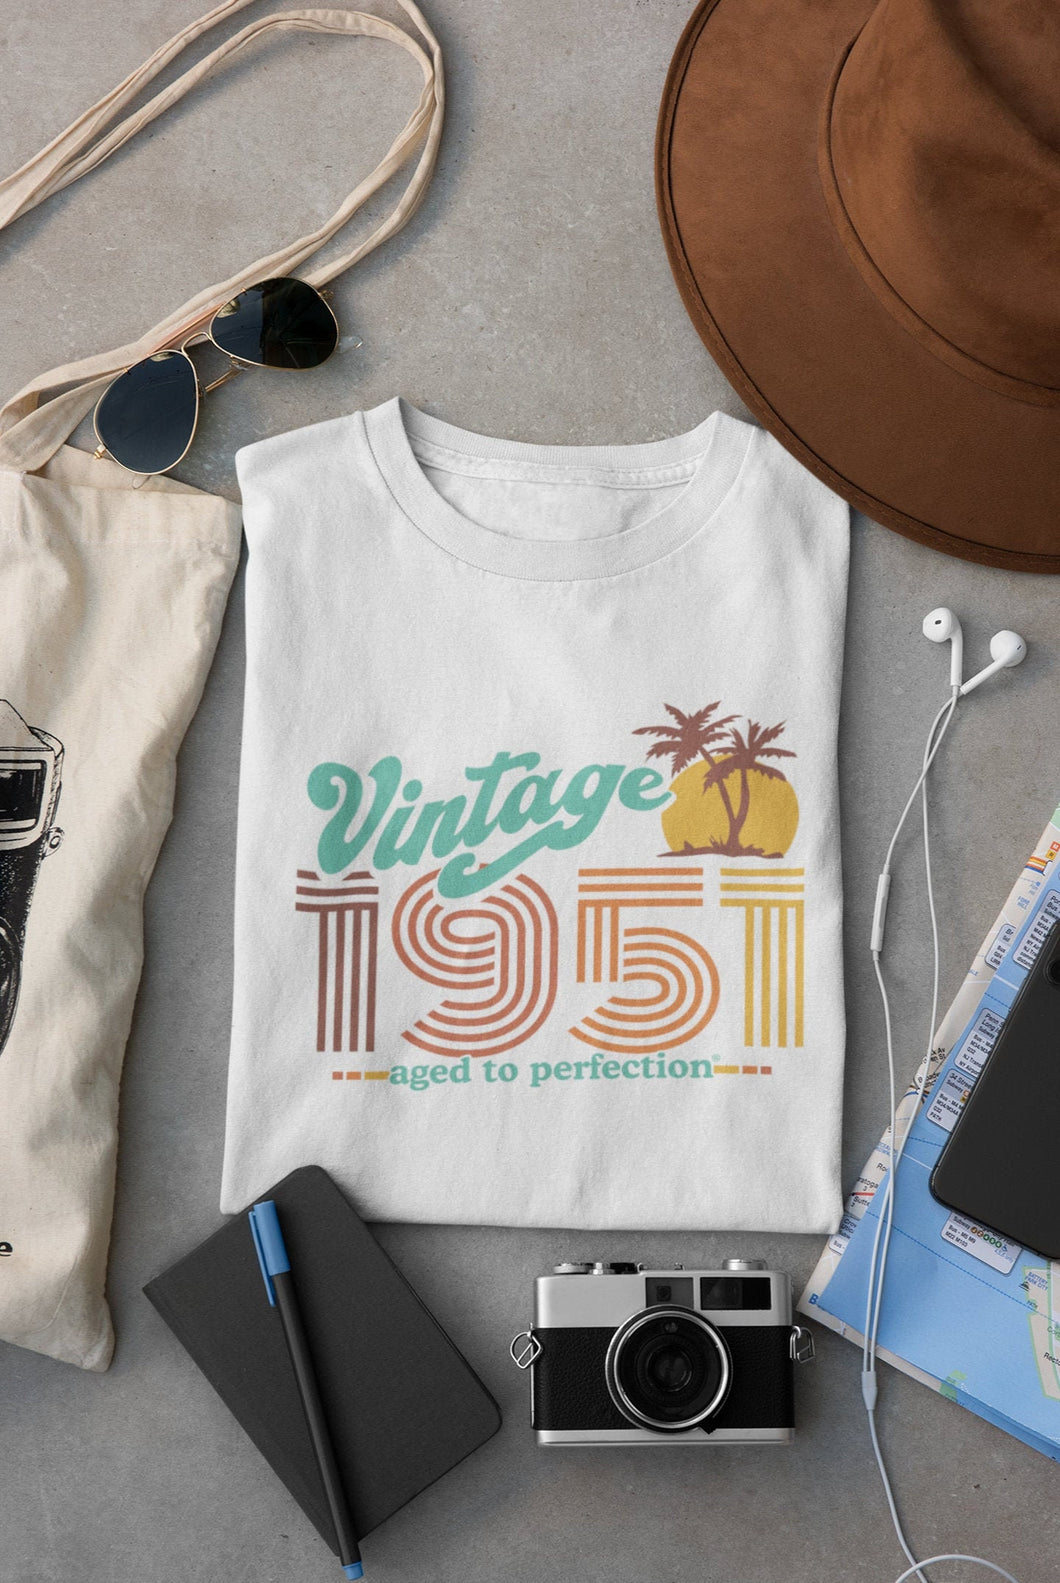 Retro Beach 70th Birthday Top For Him or Her, Women born in 1951 - Vintage 1951 shirt, Aged To Perfection, Palm Tree T-shirt Gift  PALM-1951